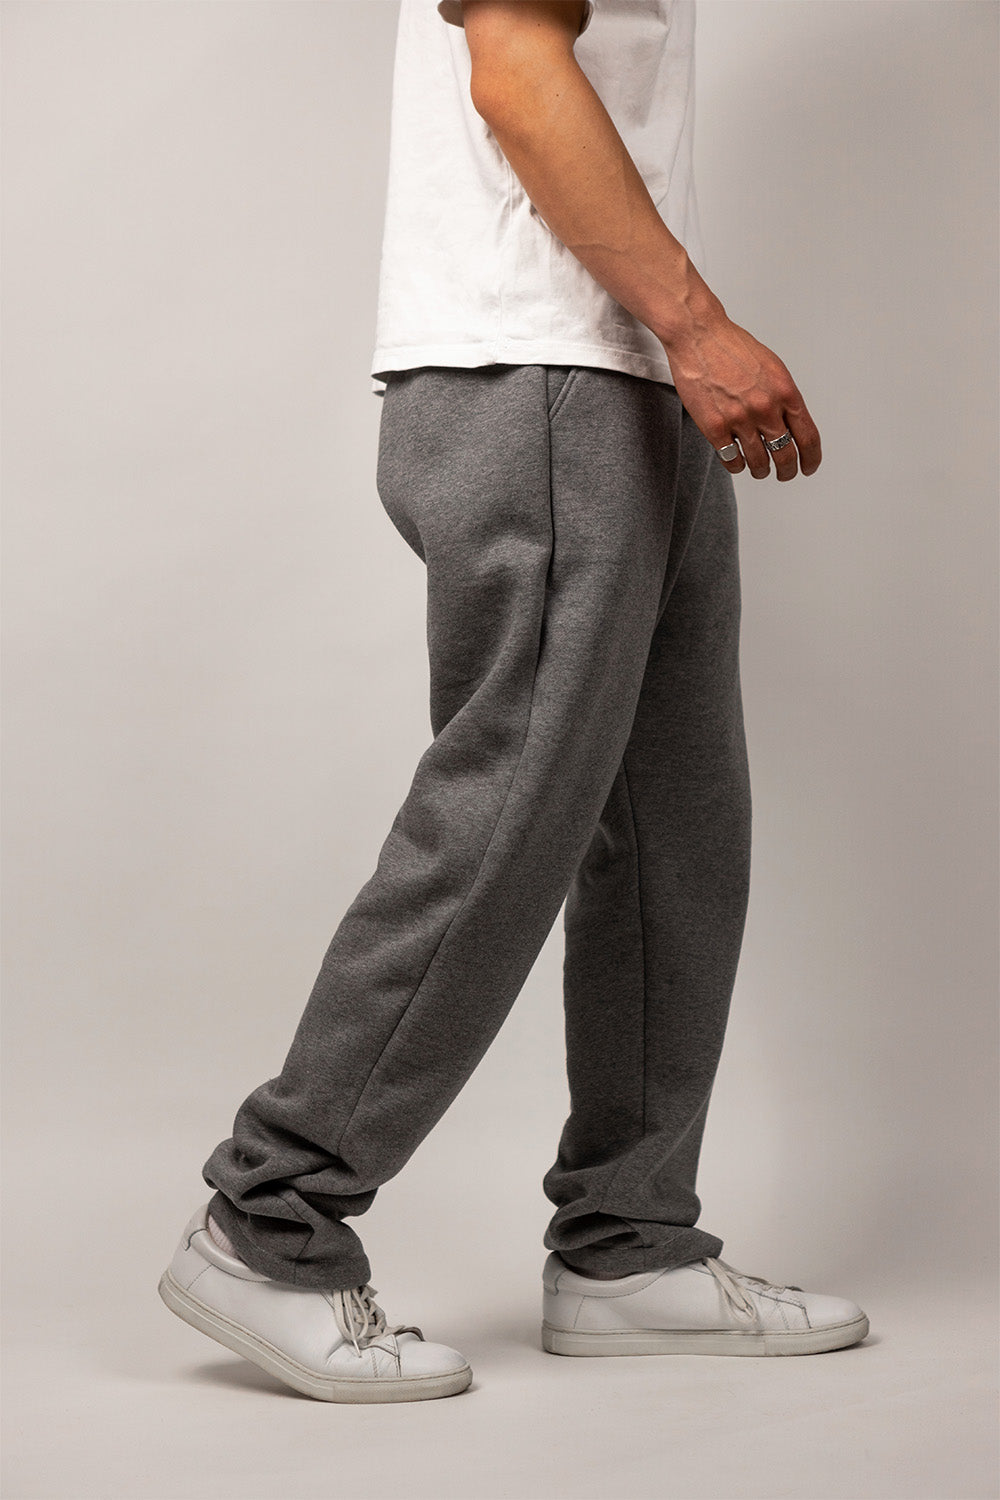 Sewing by Mrs L: Tapered Tracksuit Pants - FREE PDF PATTERN